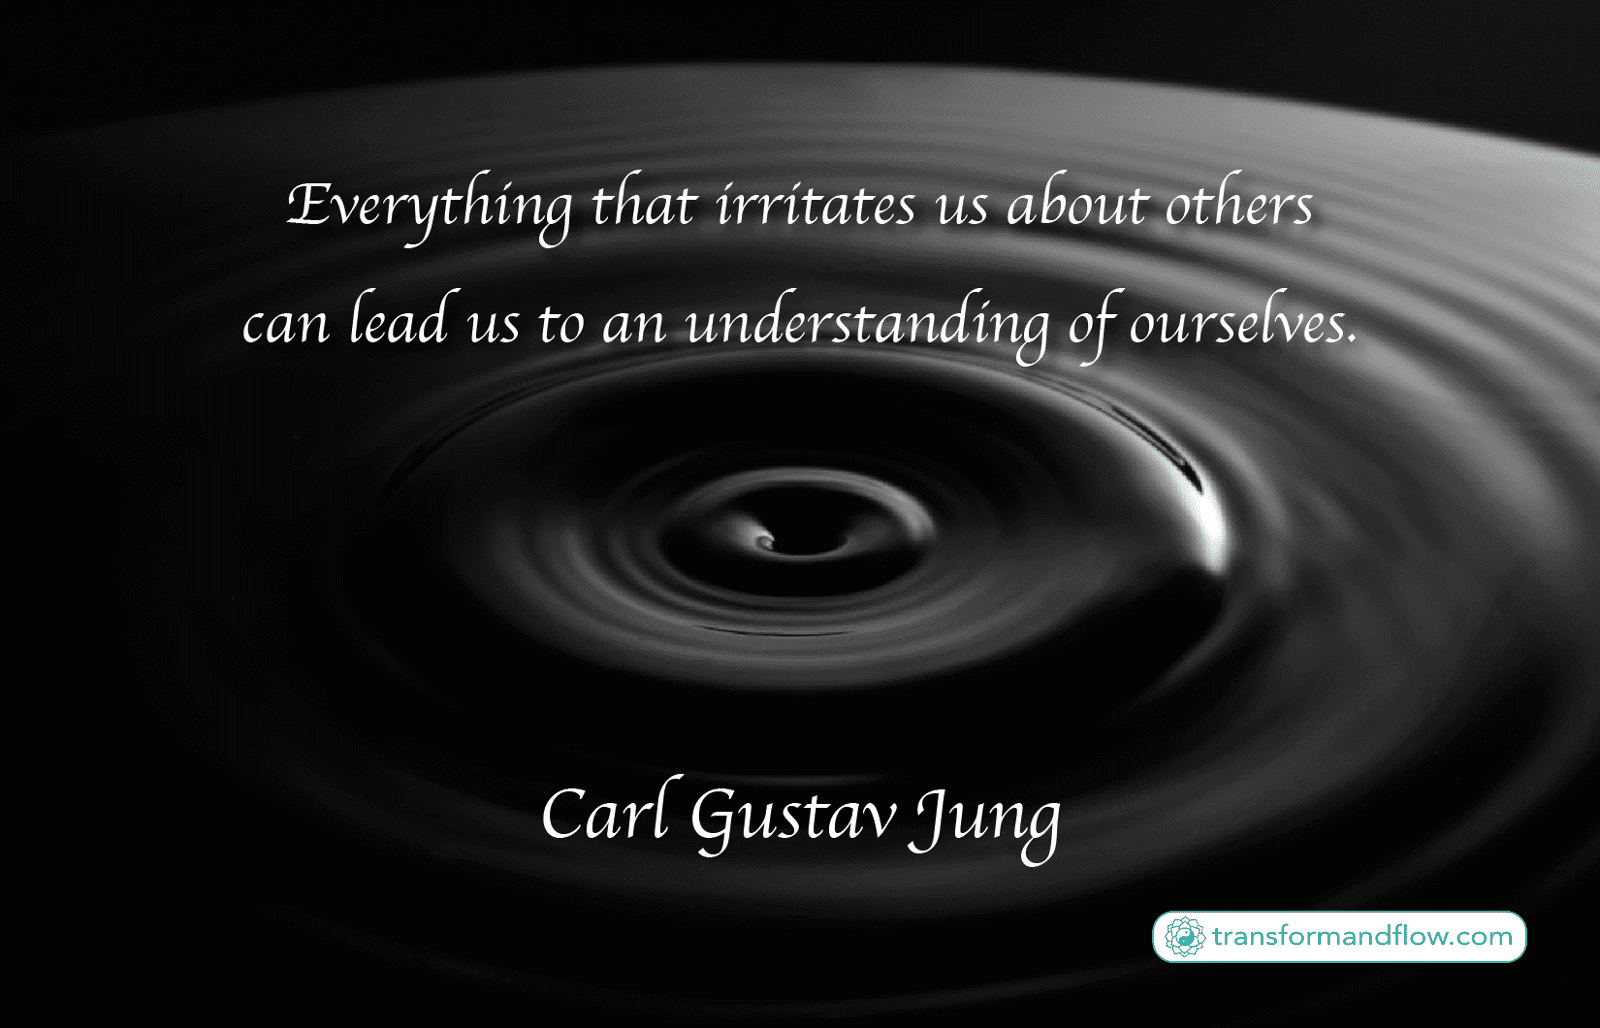 Everything that irritates us about others can lead us to an understanding of ourselves. Carl Gustav Jung